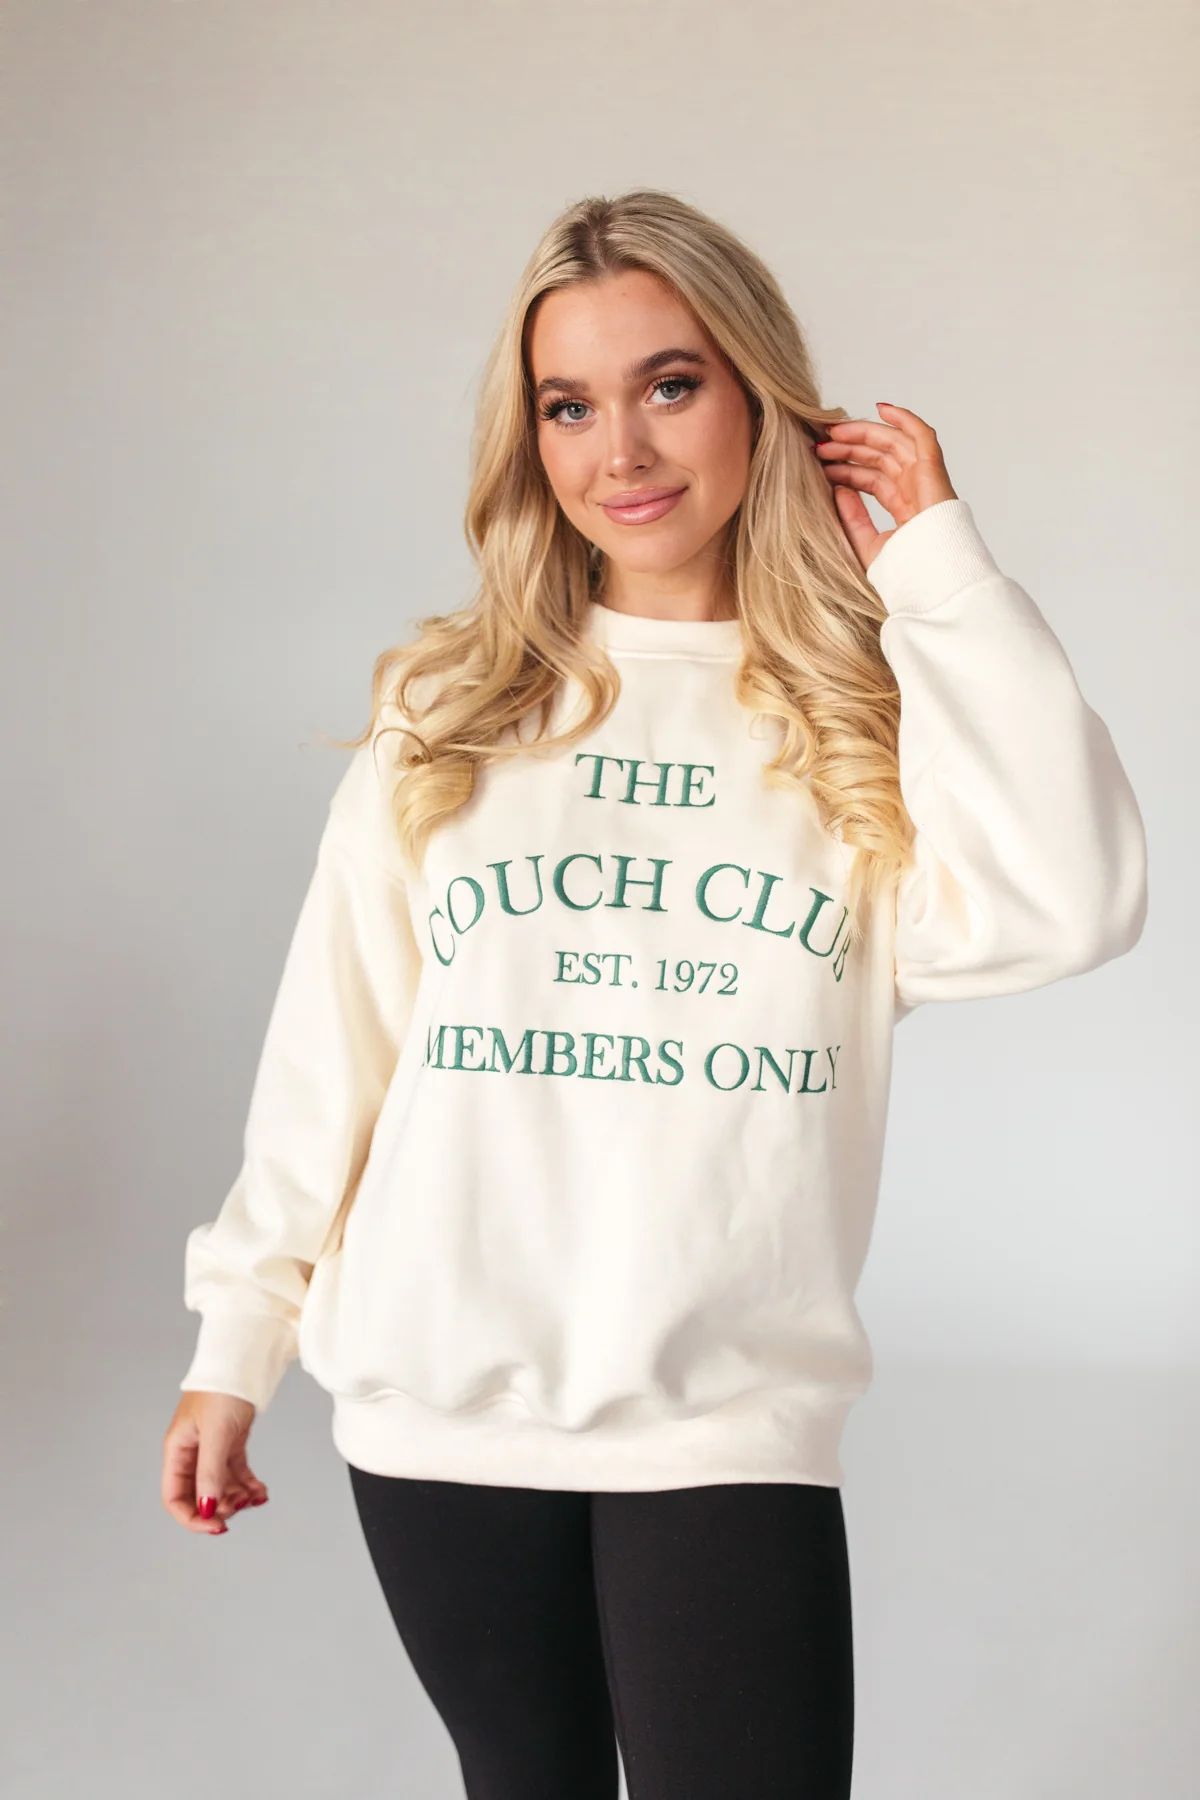 Couch Club Sweatshirt | The Post